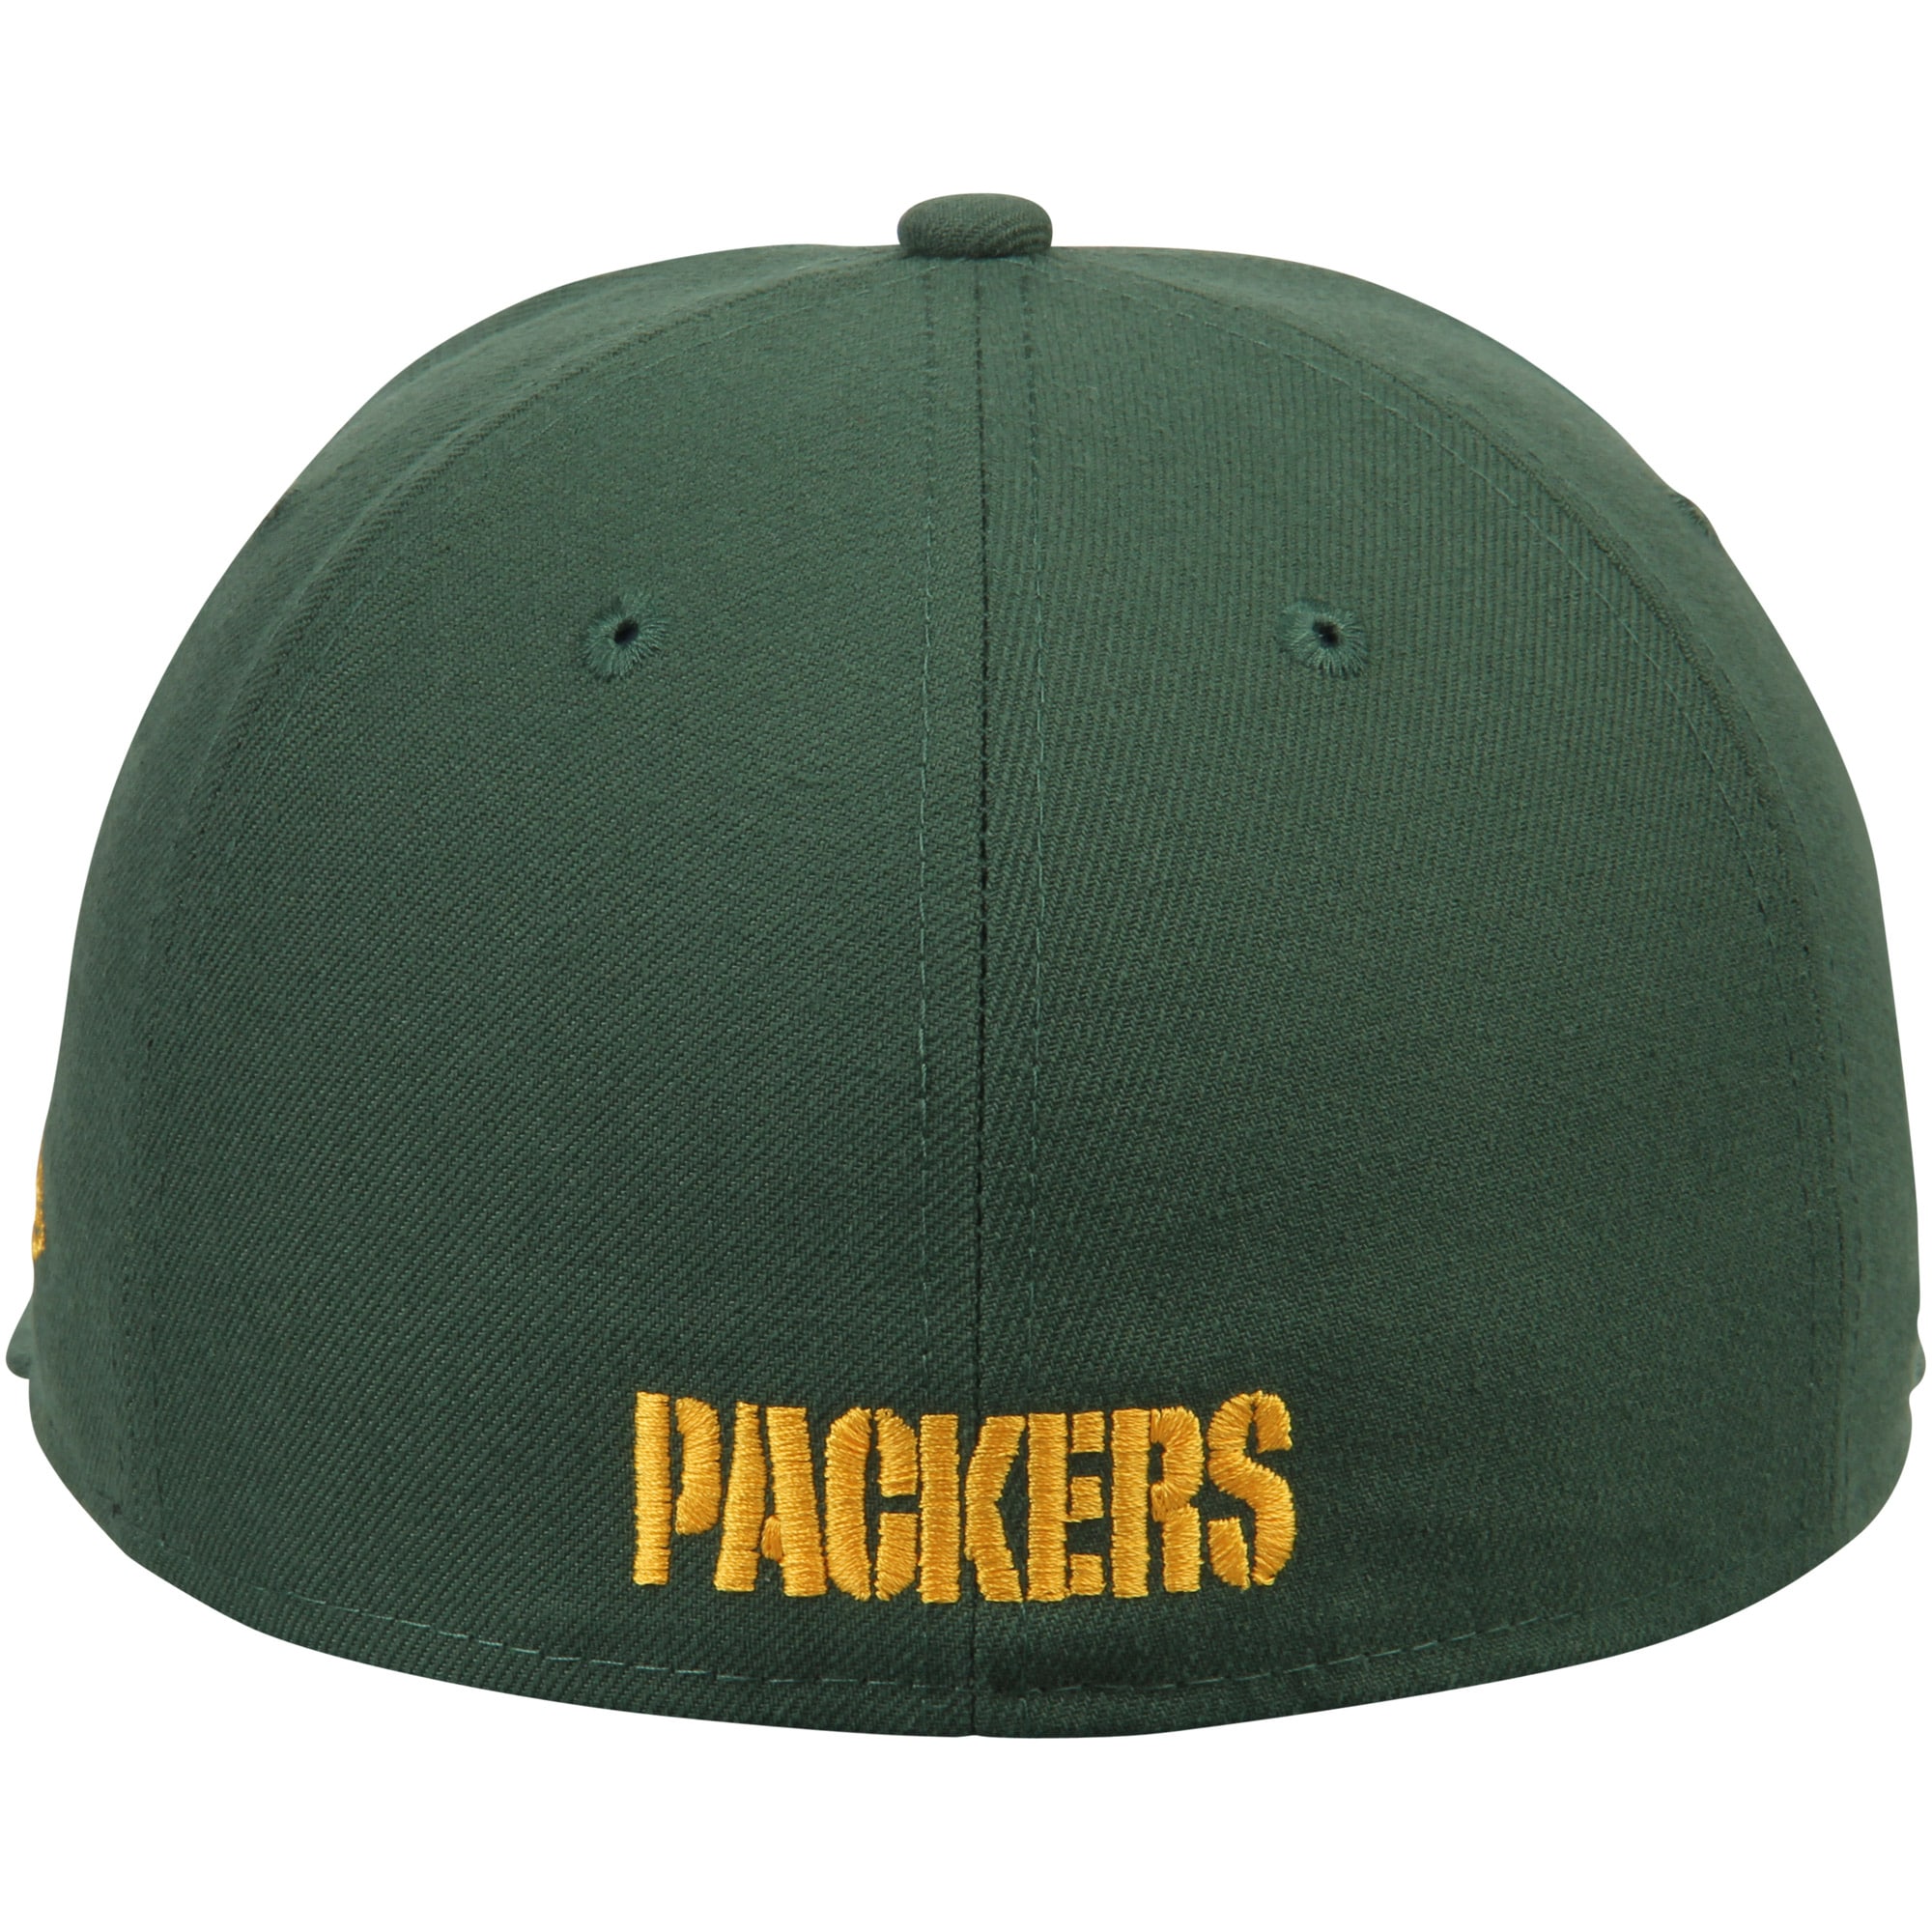 Men's New Era Green Green Bay Packers Omaha 59FIFTY Fitted Hat - image 3 of 4